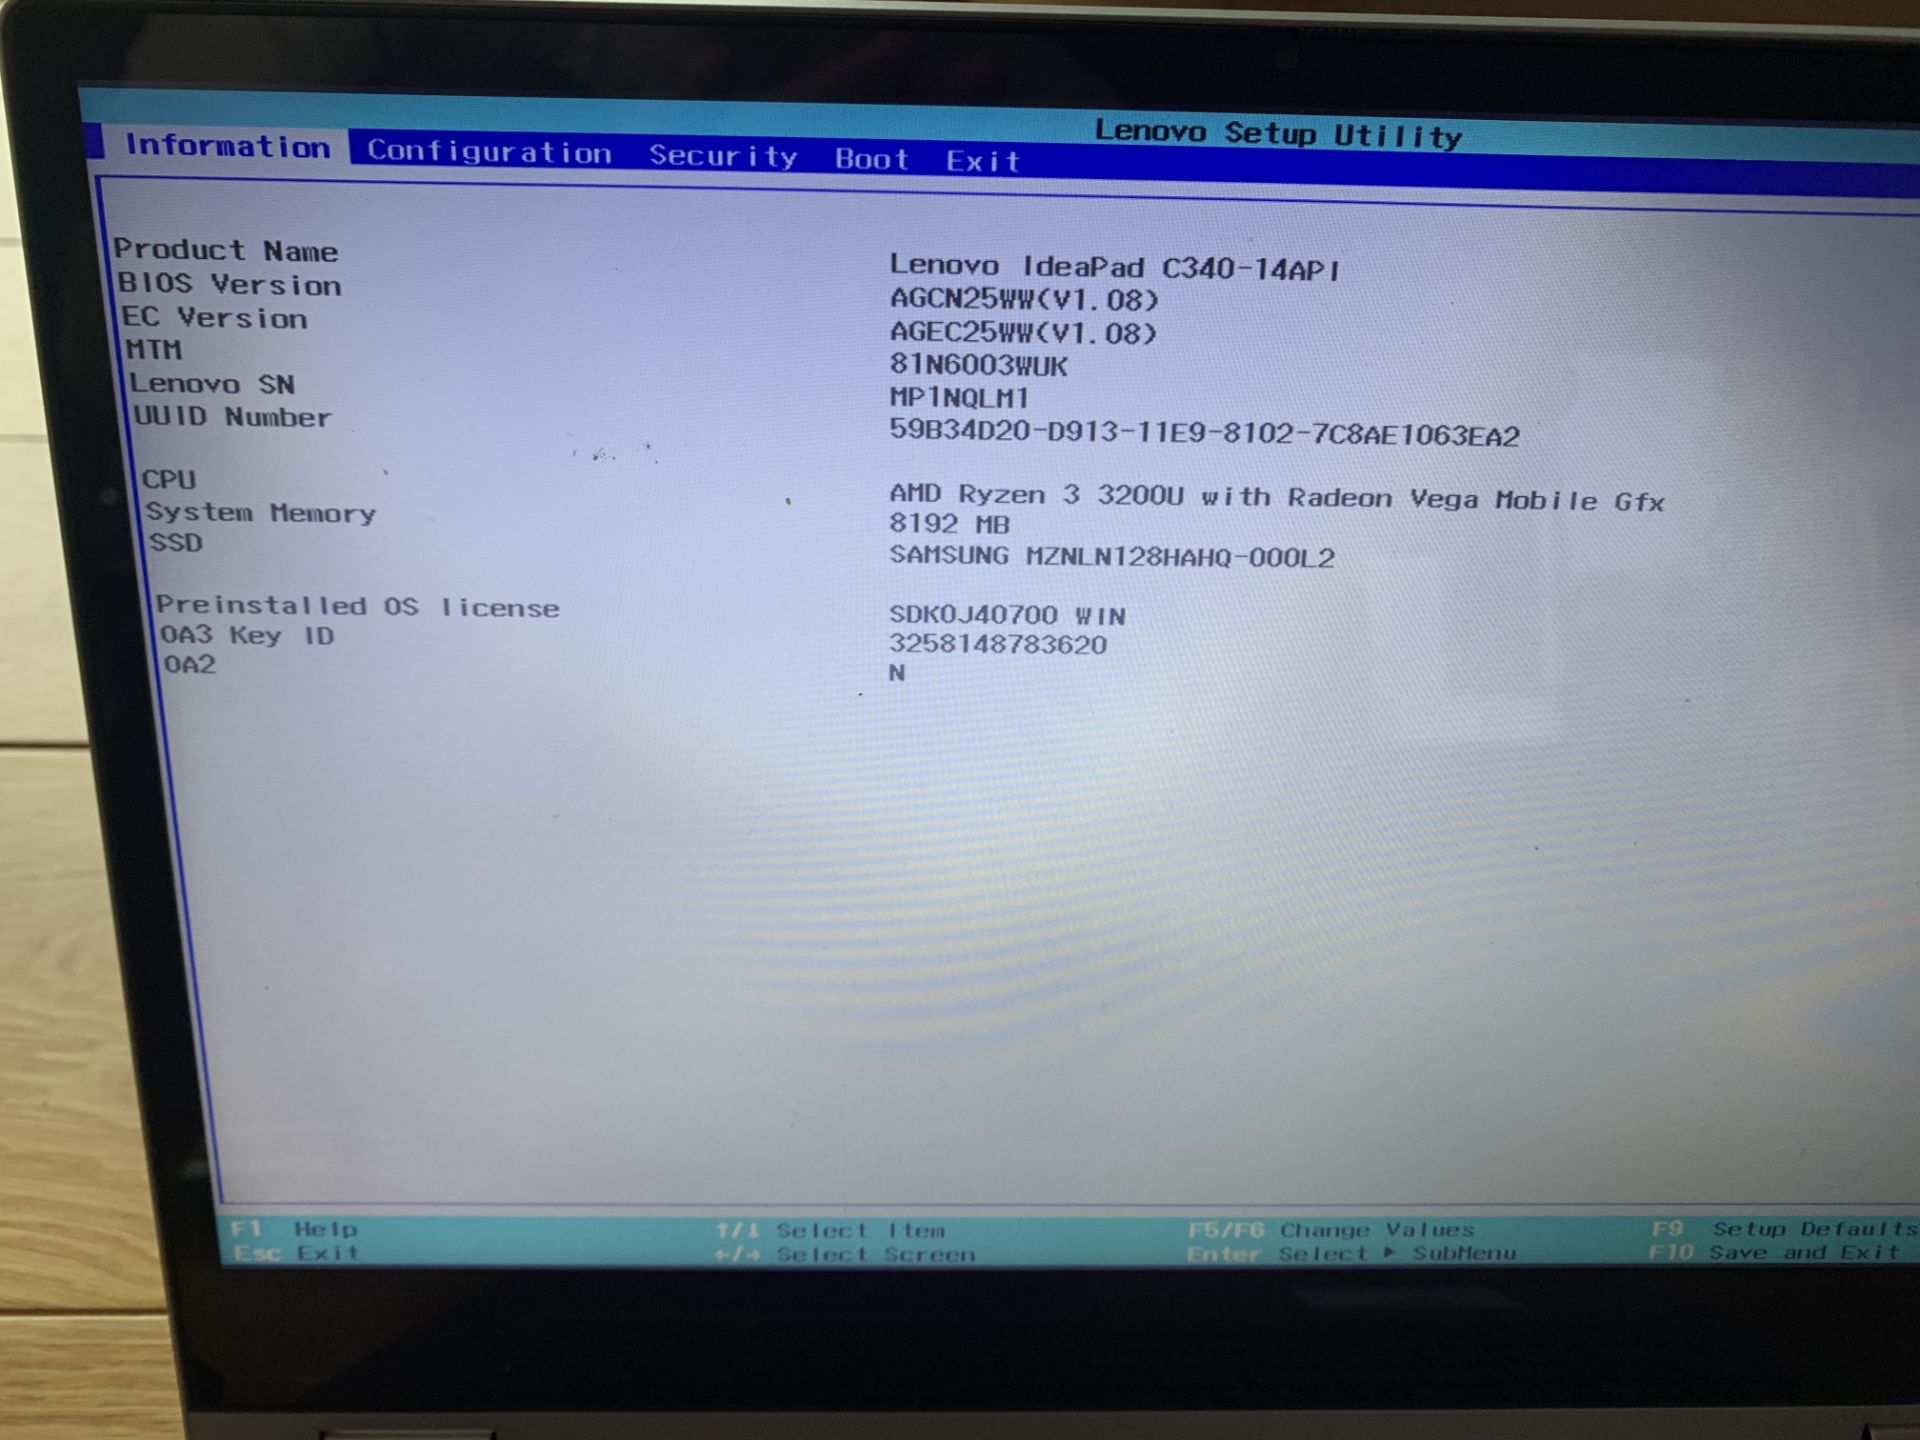 Lenovo IdeaPad C340-14API, Serial No. MP1NQLM1 (No Charger) (Hard Drive Wiped) Please read the - Image 2 of 2